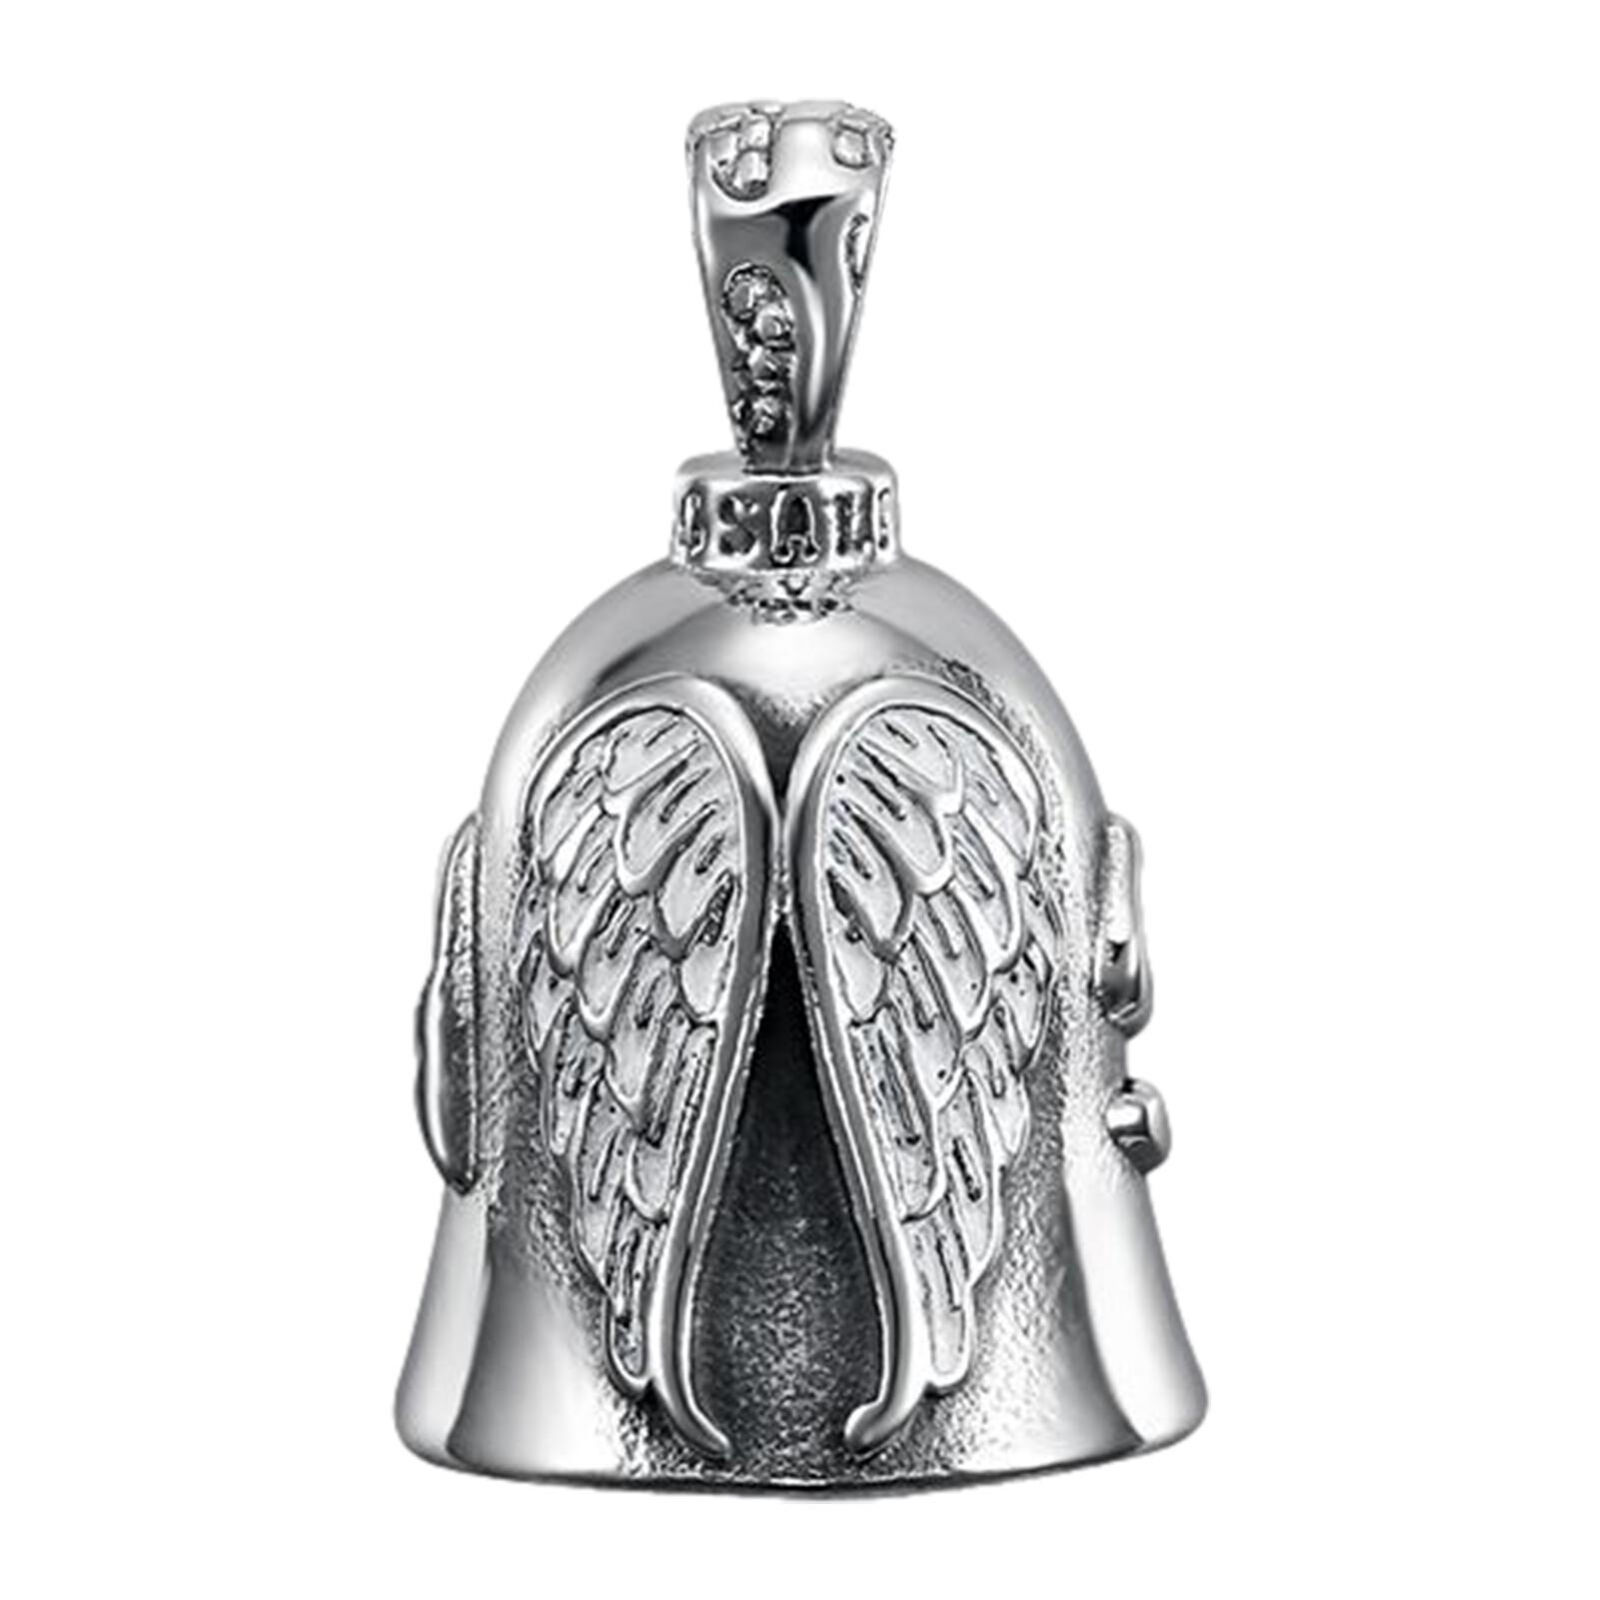 White Angel Guardian Motorcycle Riding Bell Good Luck For Biker Rider Gift